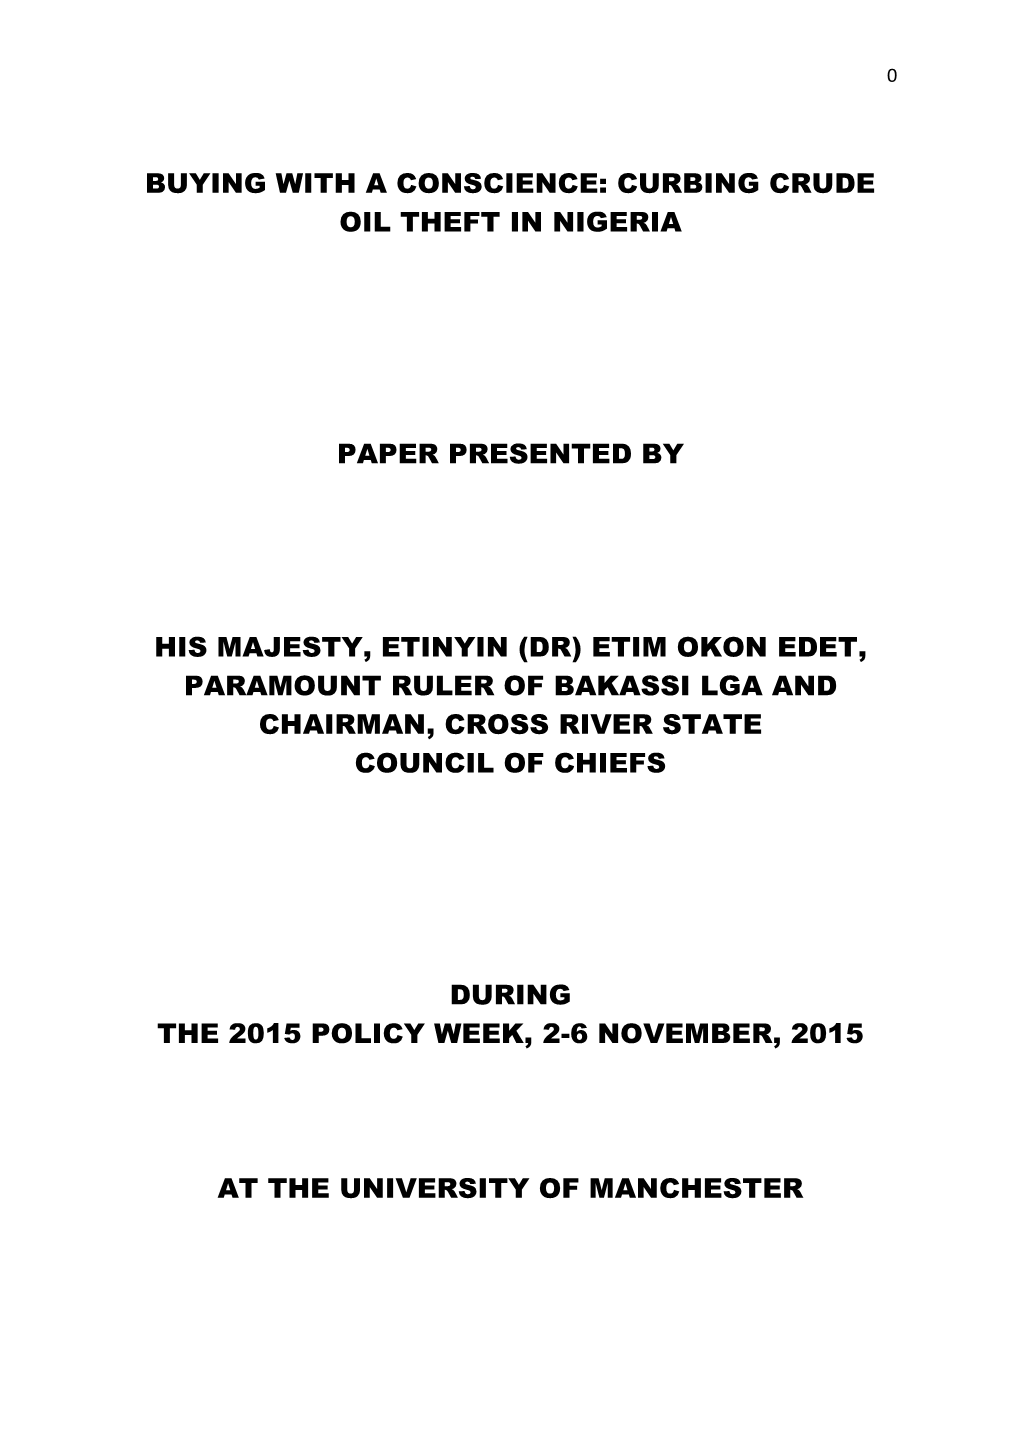 Curbing Crude Oil Theft in Nigeria Paper Presented By